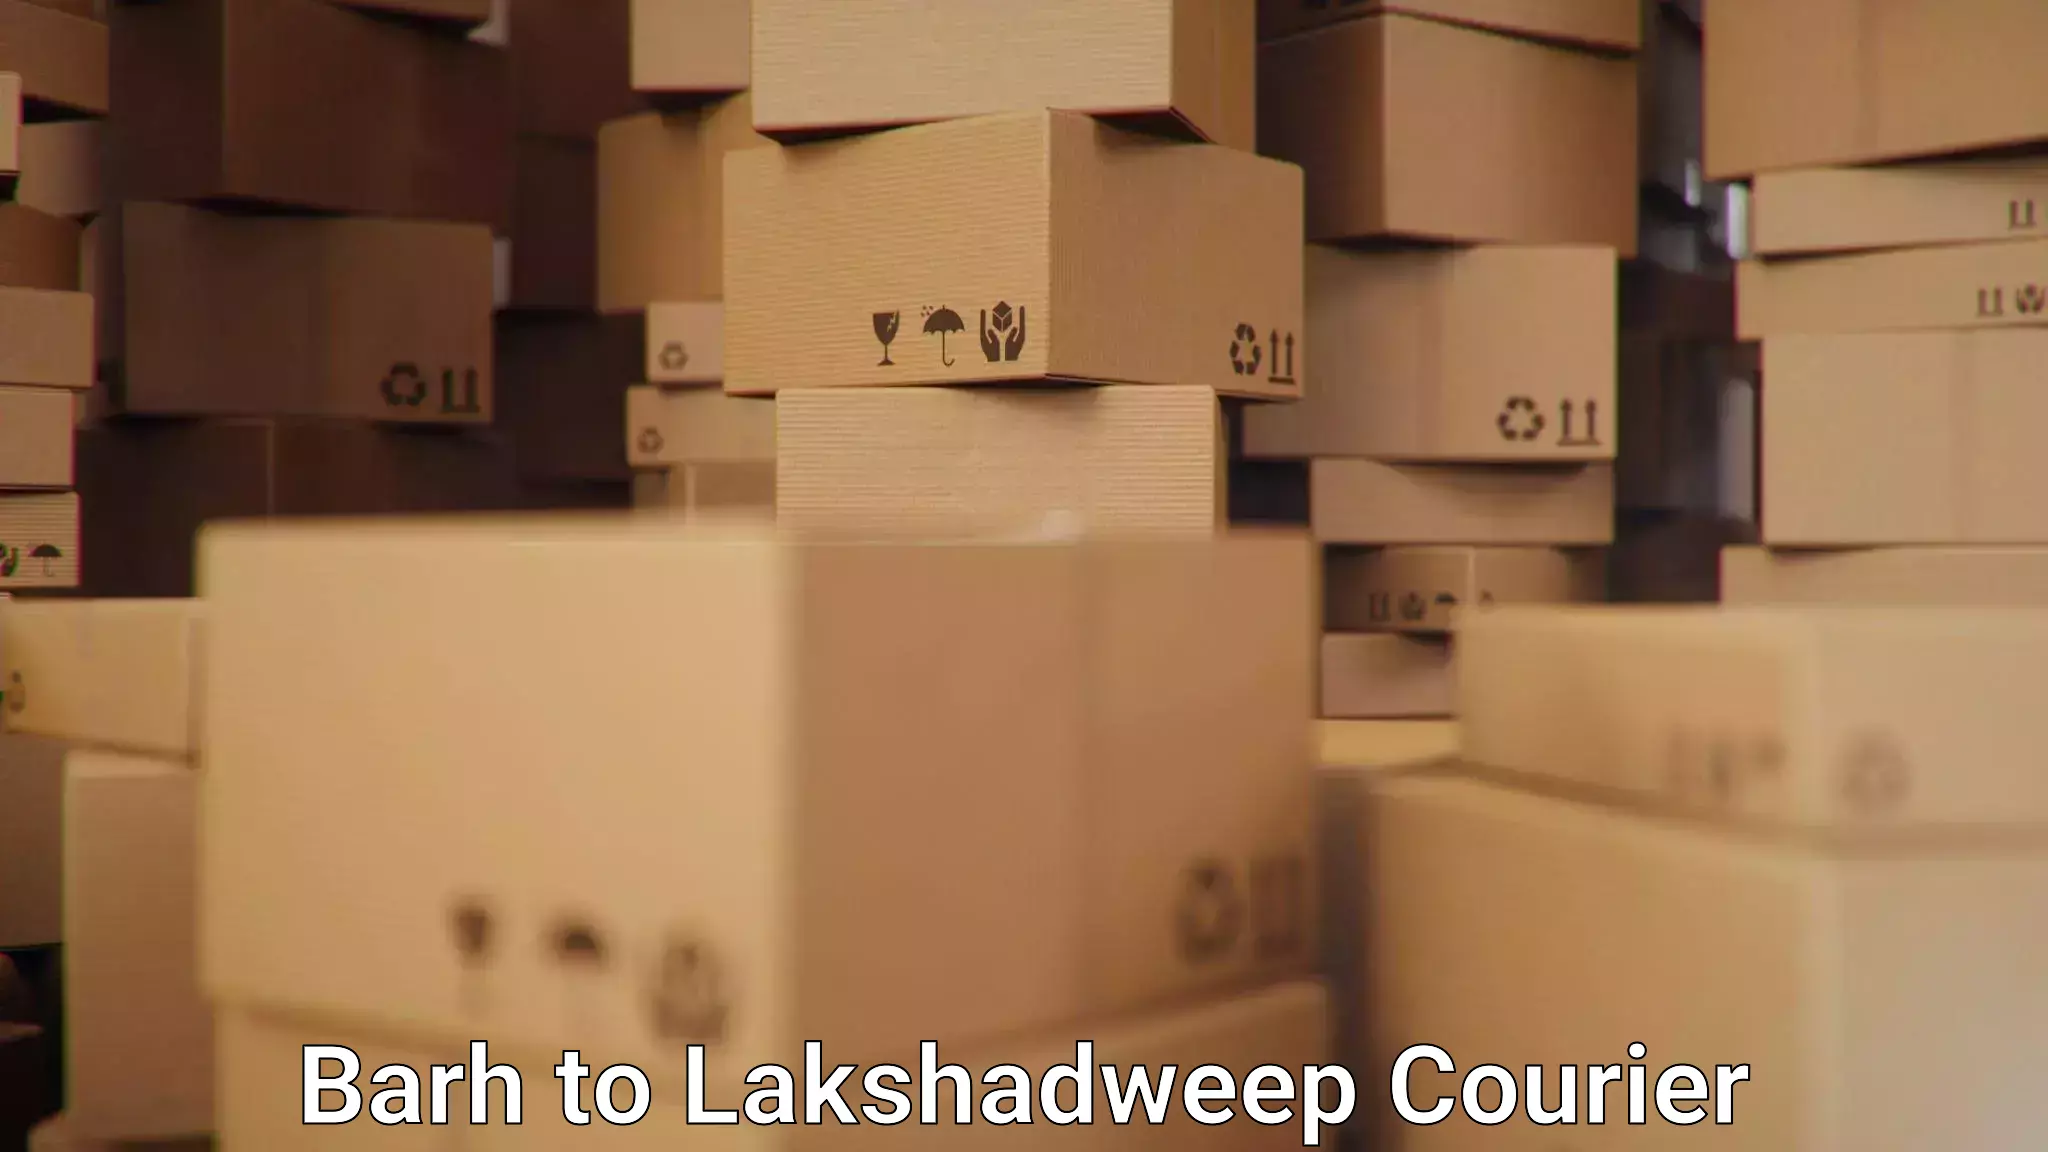 Nationwide courier service Barh to Lakshadweep